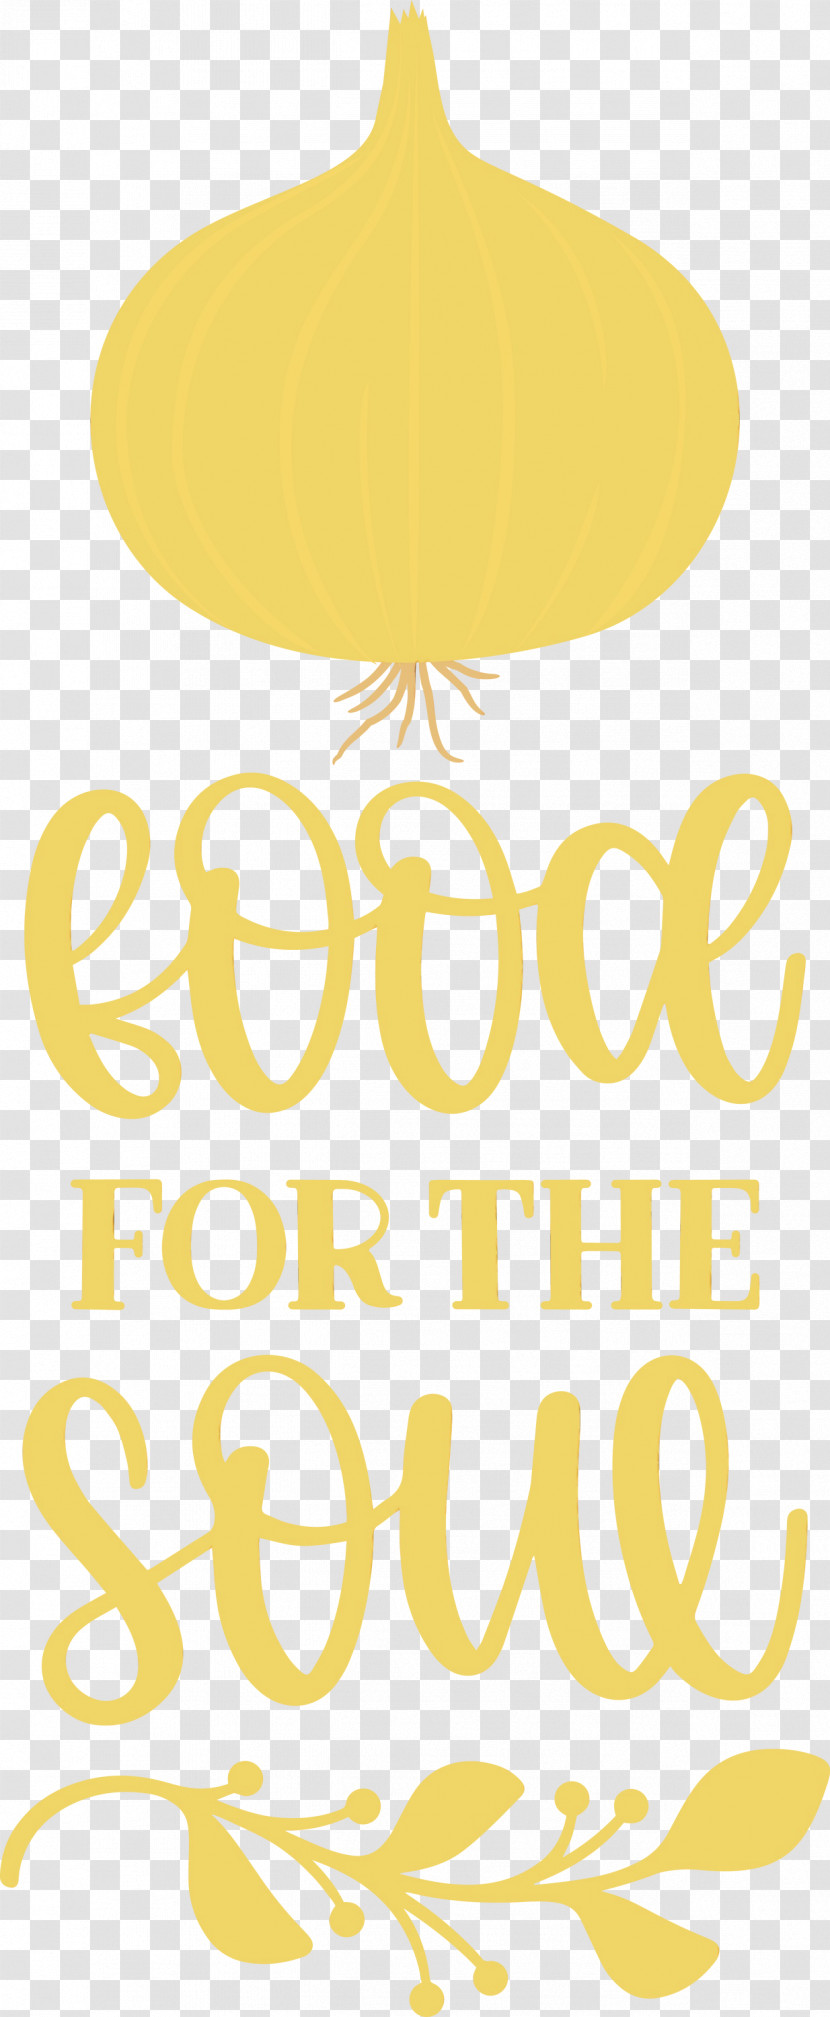 Royalty-free Poster Transparent PNG